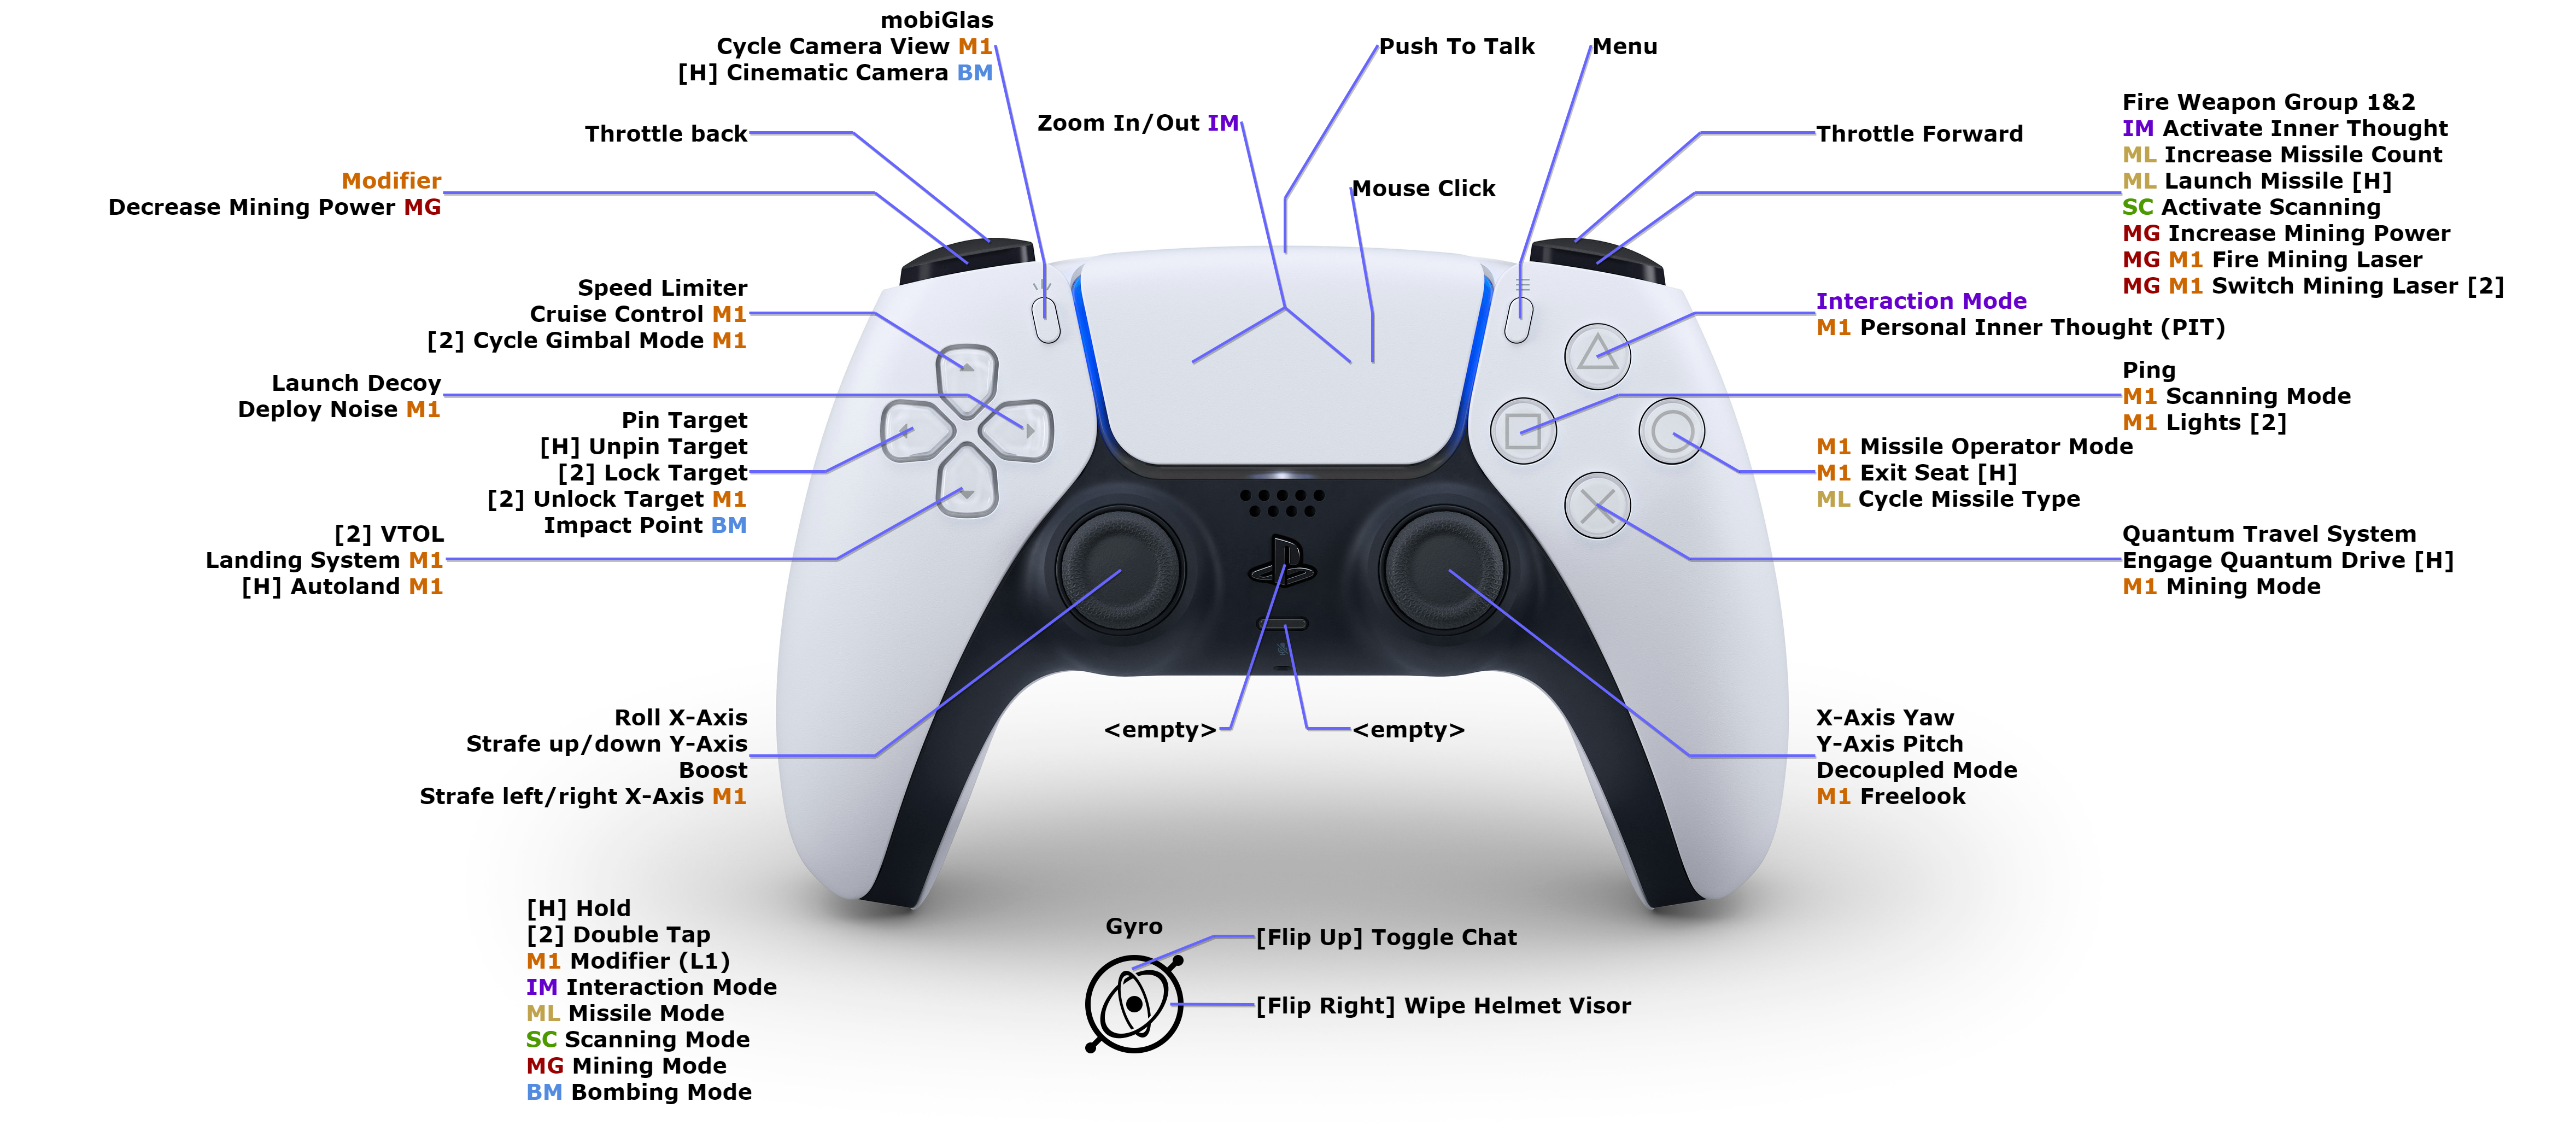 ps5-controller-mappings-v0-6jxav4y0w5981.png